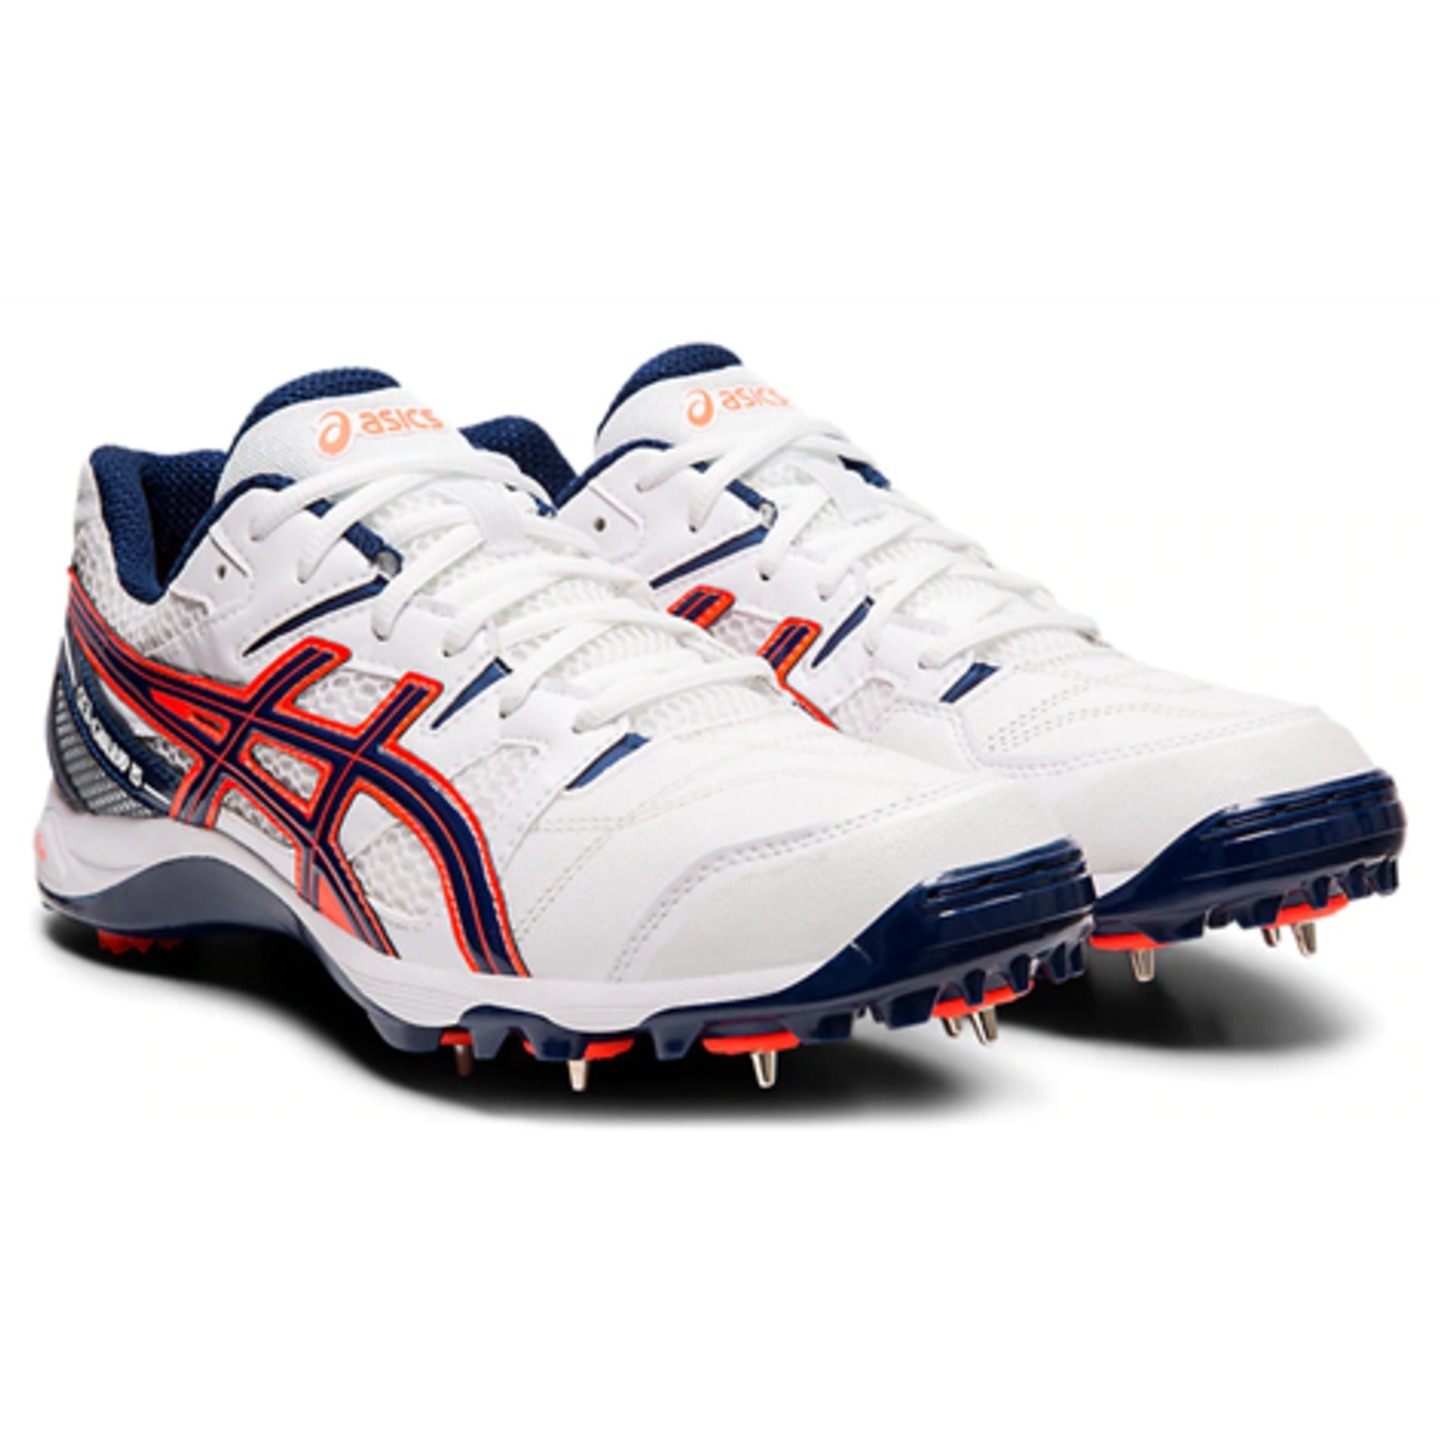 ASICS GEL-GULLY 5 CRICKET SPIKE SHOES